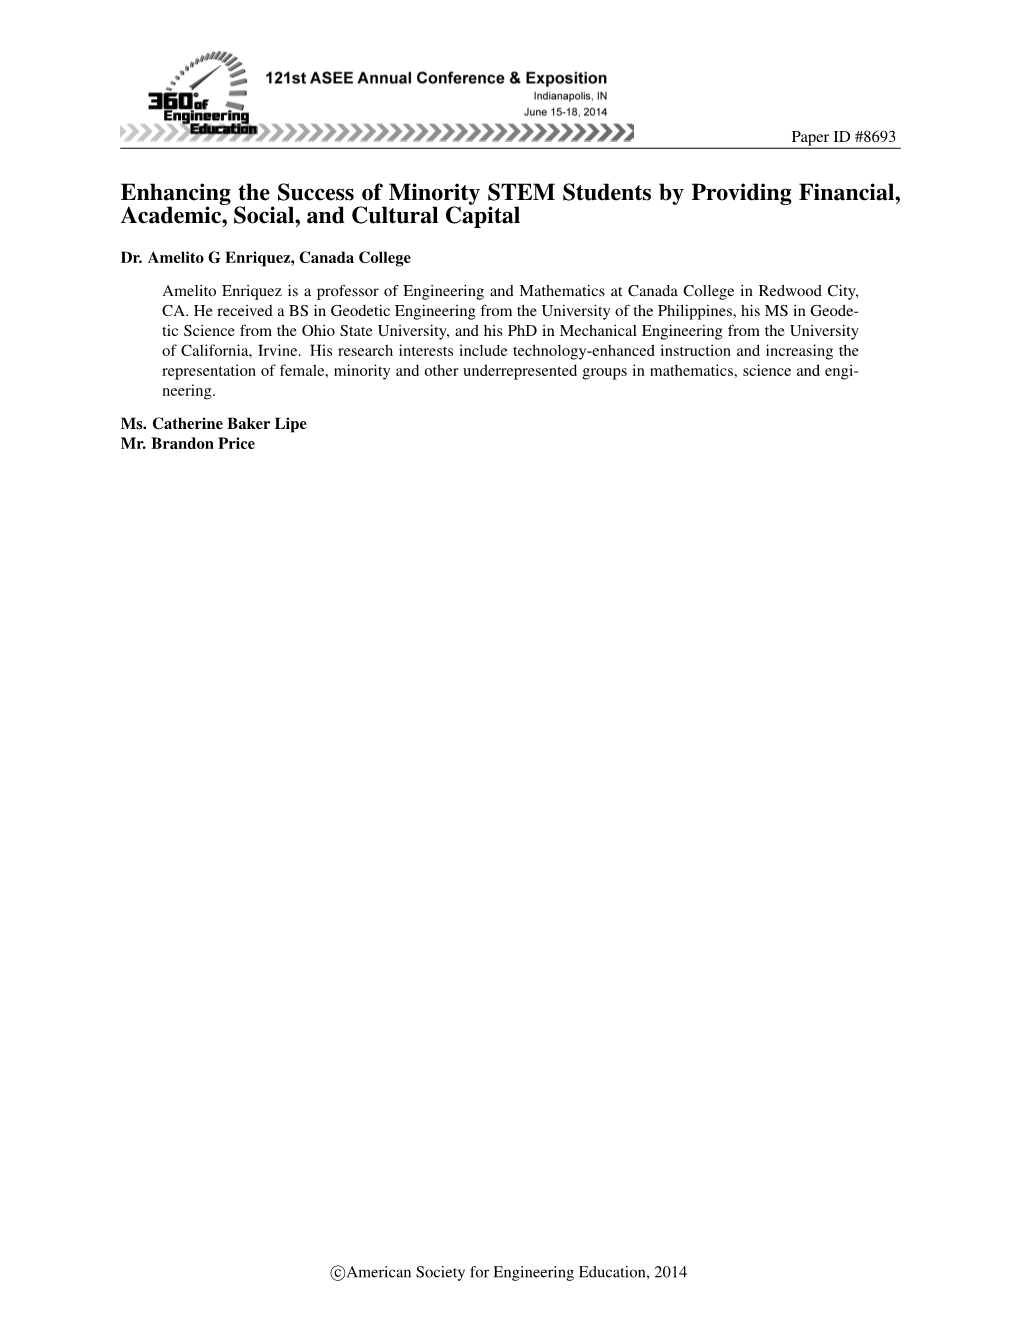 Enhancing the Success of Minority STEM Students by Providing Financial, Academic, Social, and Cultural Capital